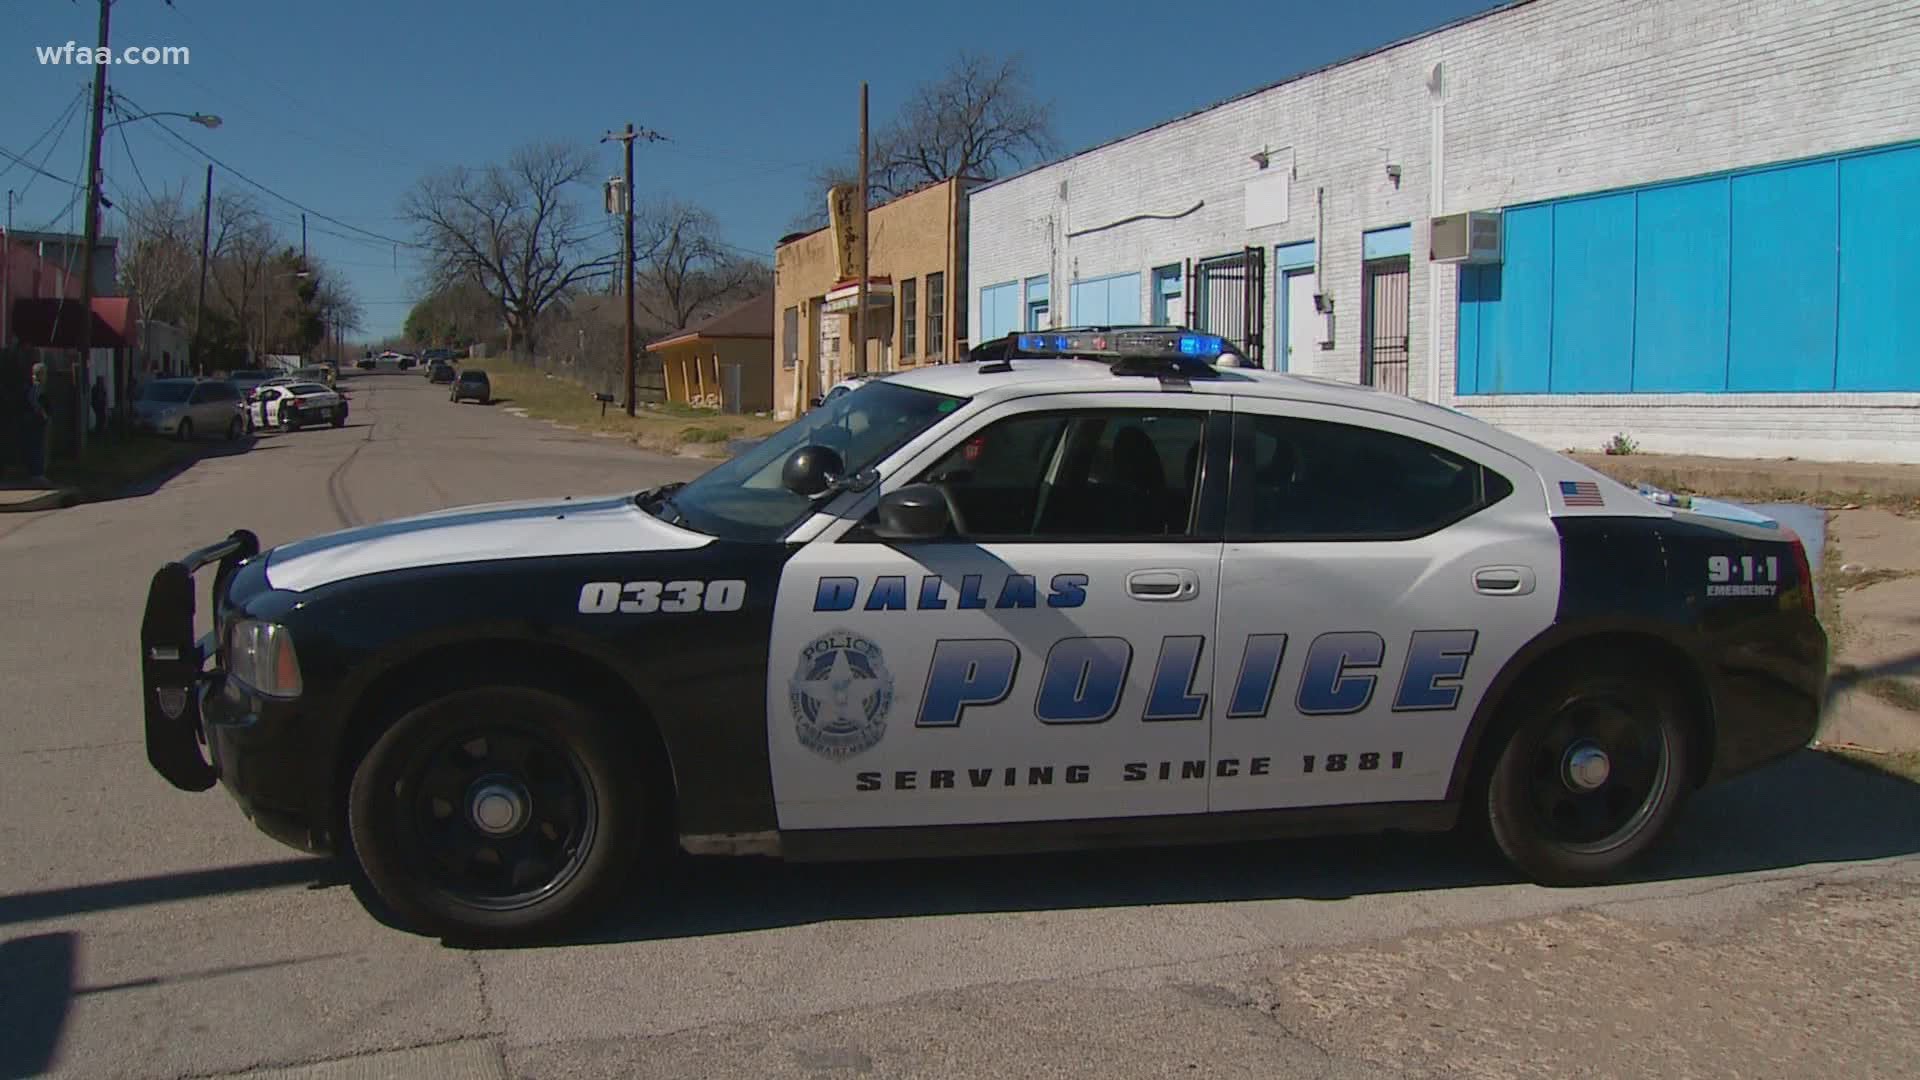 The City of Dallas is still considering ways to cut officers' overtime - to the tune of some $7 million dollars.